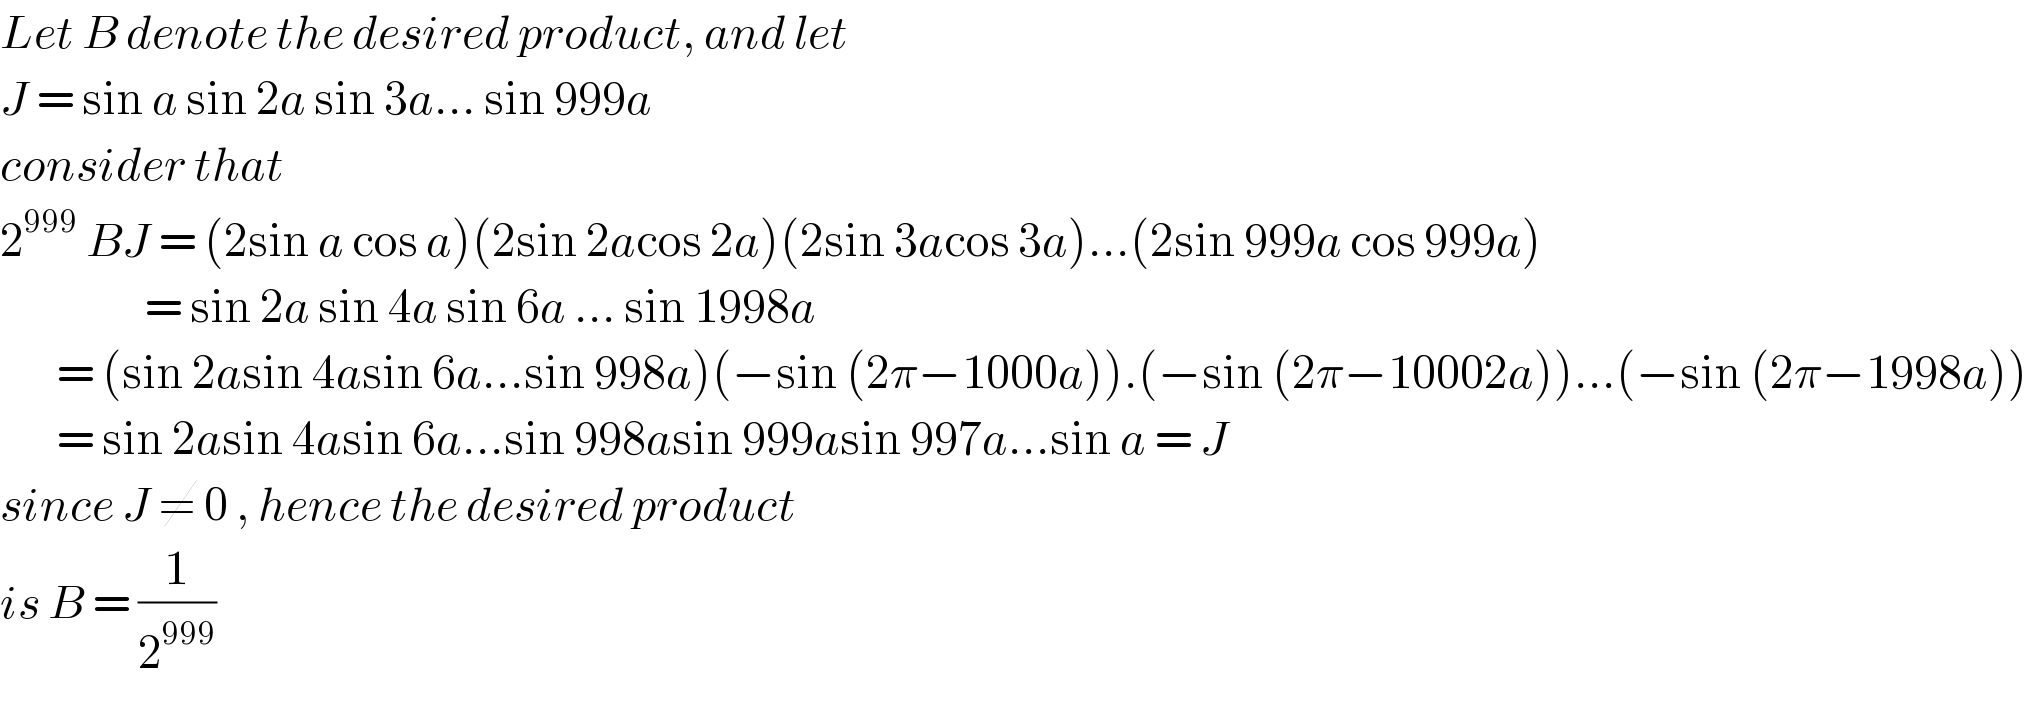 Let B denote the desired product, and let  J = sin a sin 2a sin 3a... sin 999a  consider that   2^(999)  BJ = (2sin a cos a)(2sin 2acos 2a)(2sin 3acos 3a)...(2sin 999a cos 999a)                    = sin 2a sin 4a sin 6a ... sin 1998a         = (sin 2asin 4asin 6a...sin 998a)(−sin (2π−1000a)).(−sin (2π−10002a))...(−sin (2π−1998a))         = sin 2asin 4asin 6a...sin 998asin 999asin 997a...sin a = J  since J ≠ 0 , hence the desired product  is B = (1/2^(999) )   